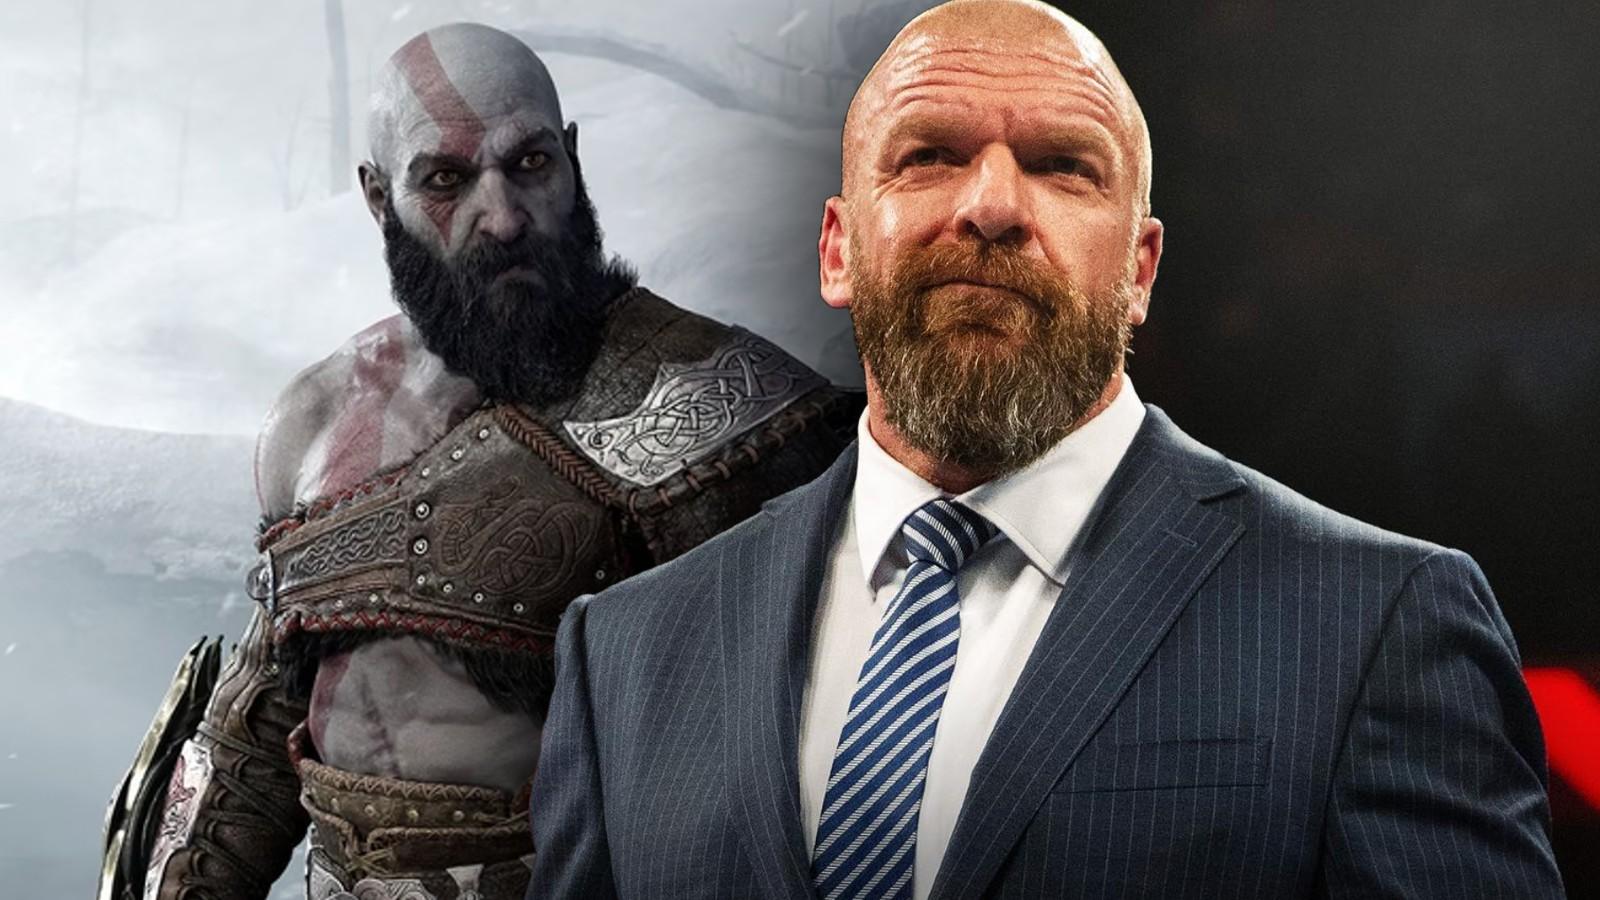 Kratos in God of War and Triple H